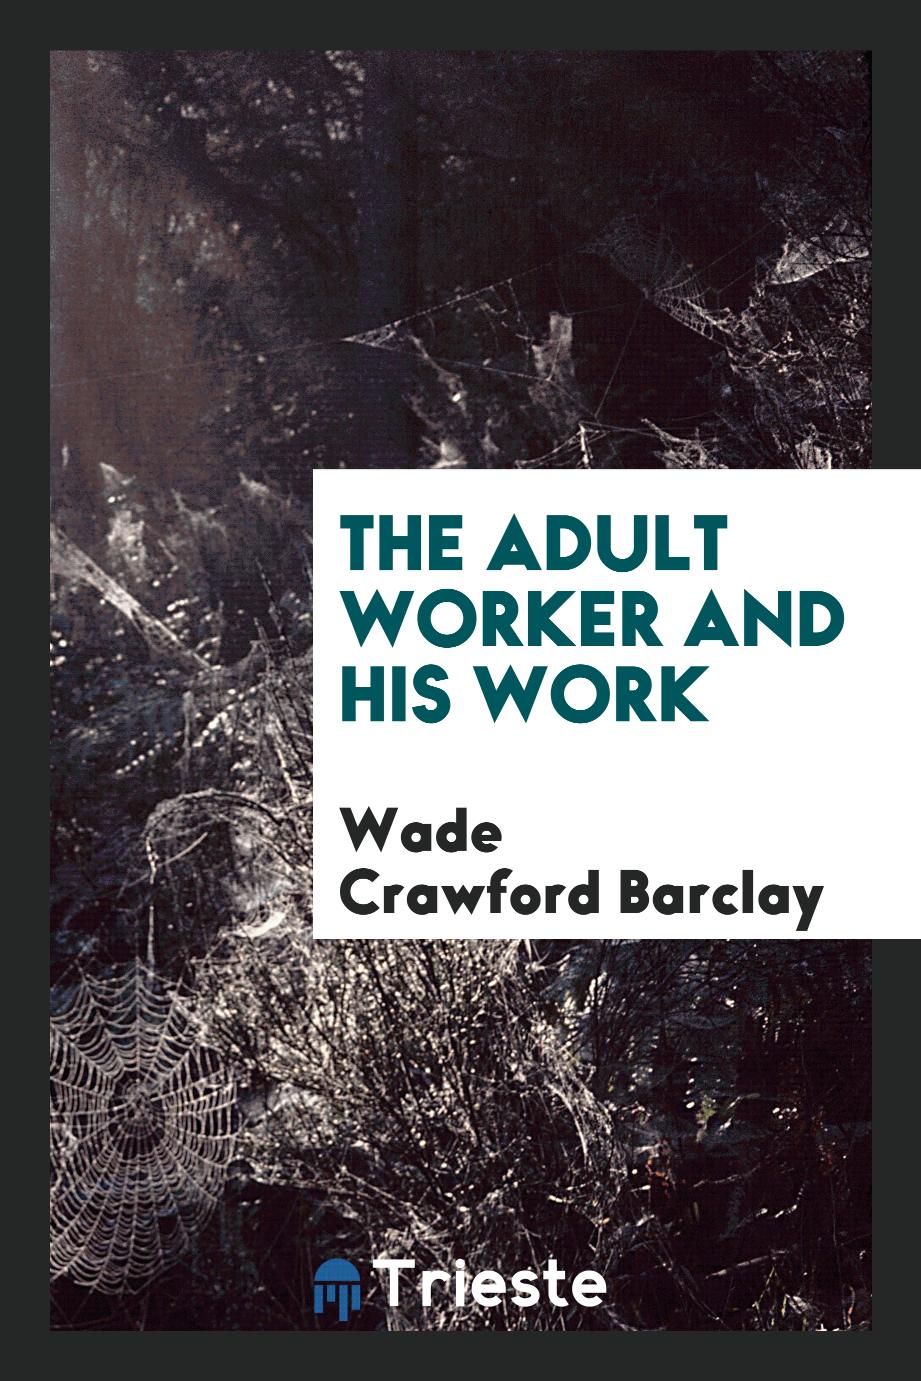 The adult worker and his work